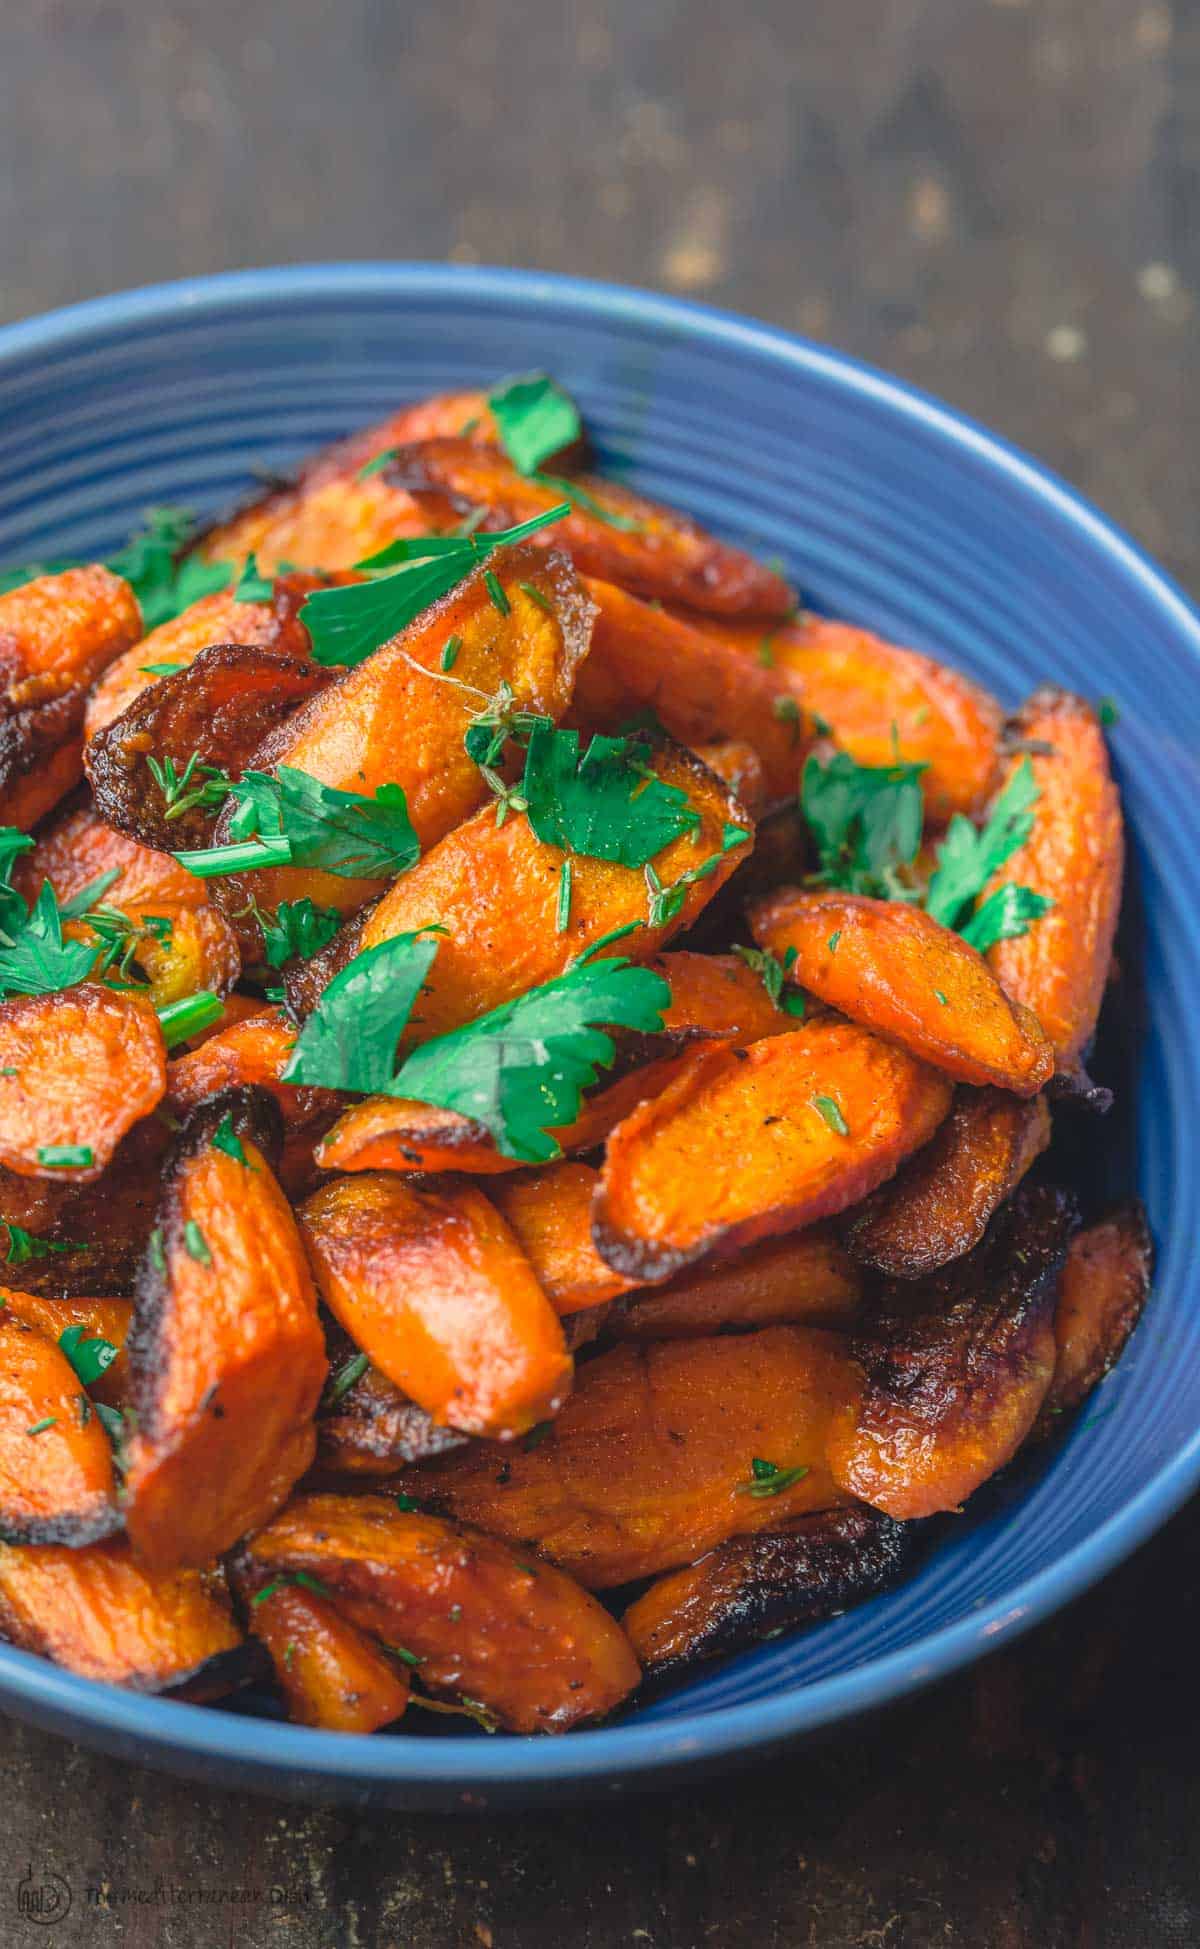 Roasted carrots in bowl with parsley